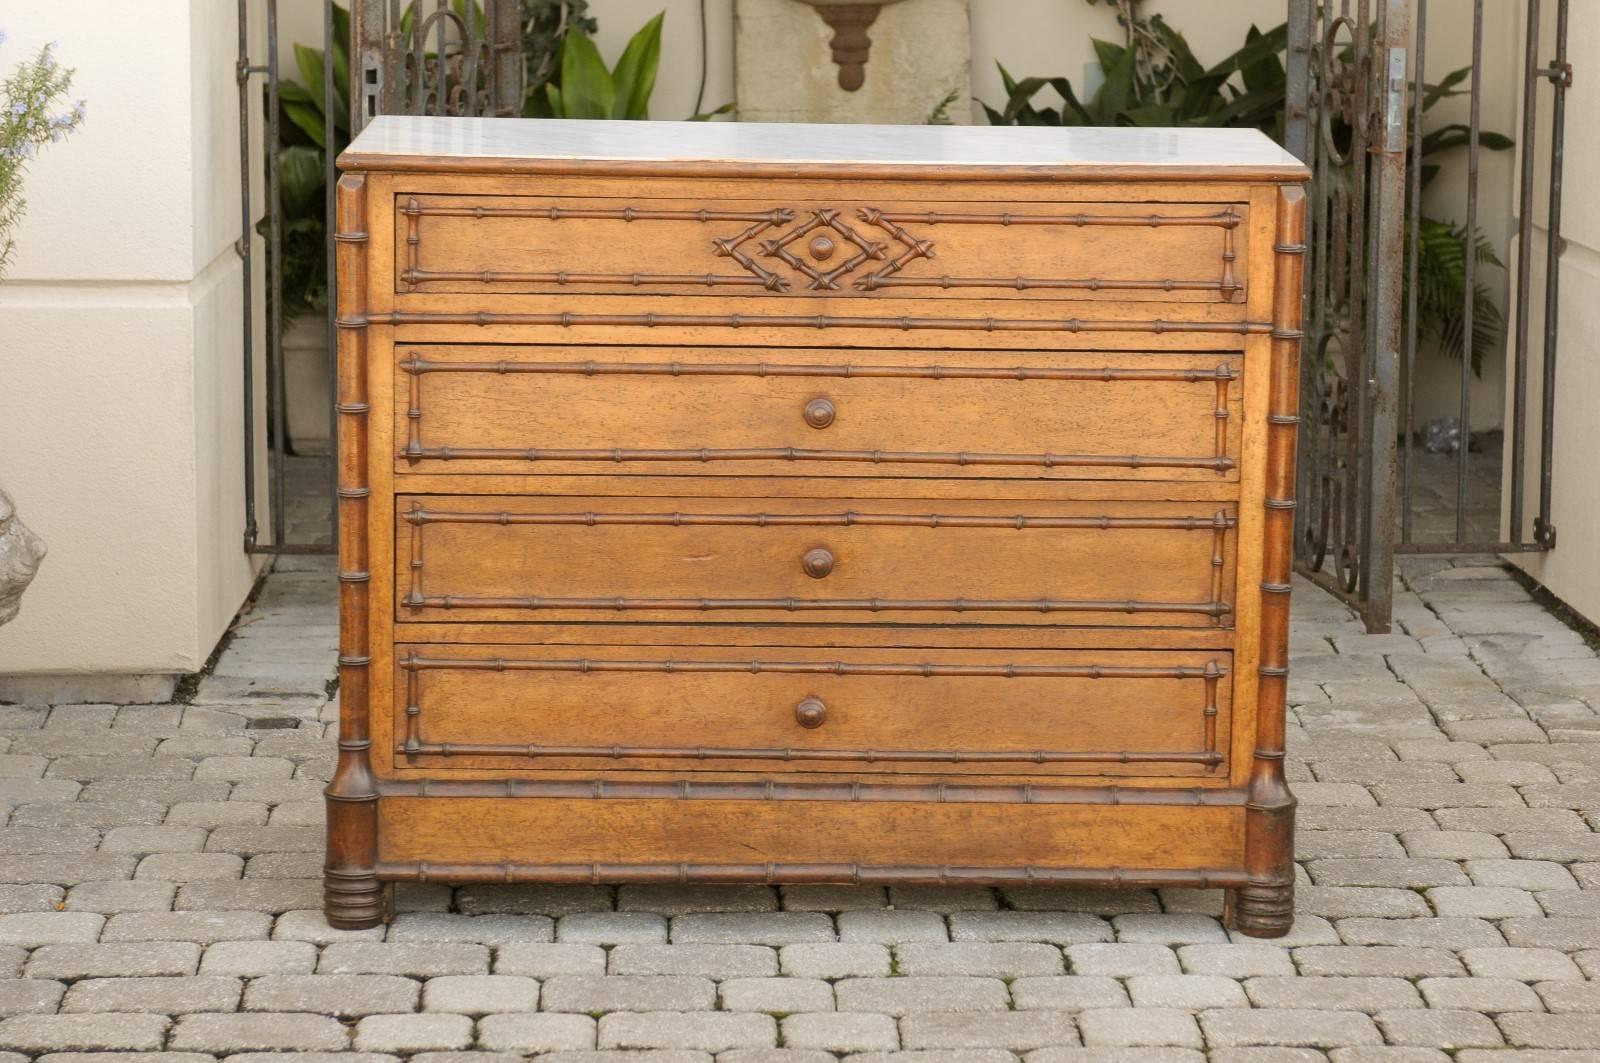 English marble top chest of drawers with faux bamboo trim.  This 19th century English chest of drawers, surrounded by faux bamboo trim and posts ending on bobbin-turned feet at the front, offers a great deal of storage capacity. A rectangular white